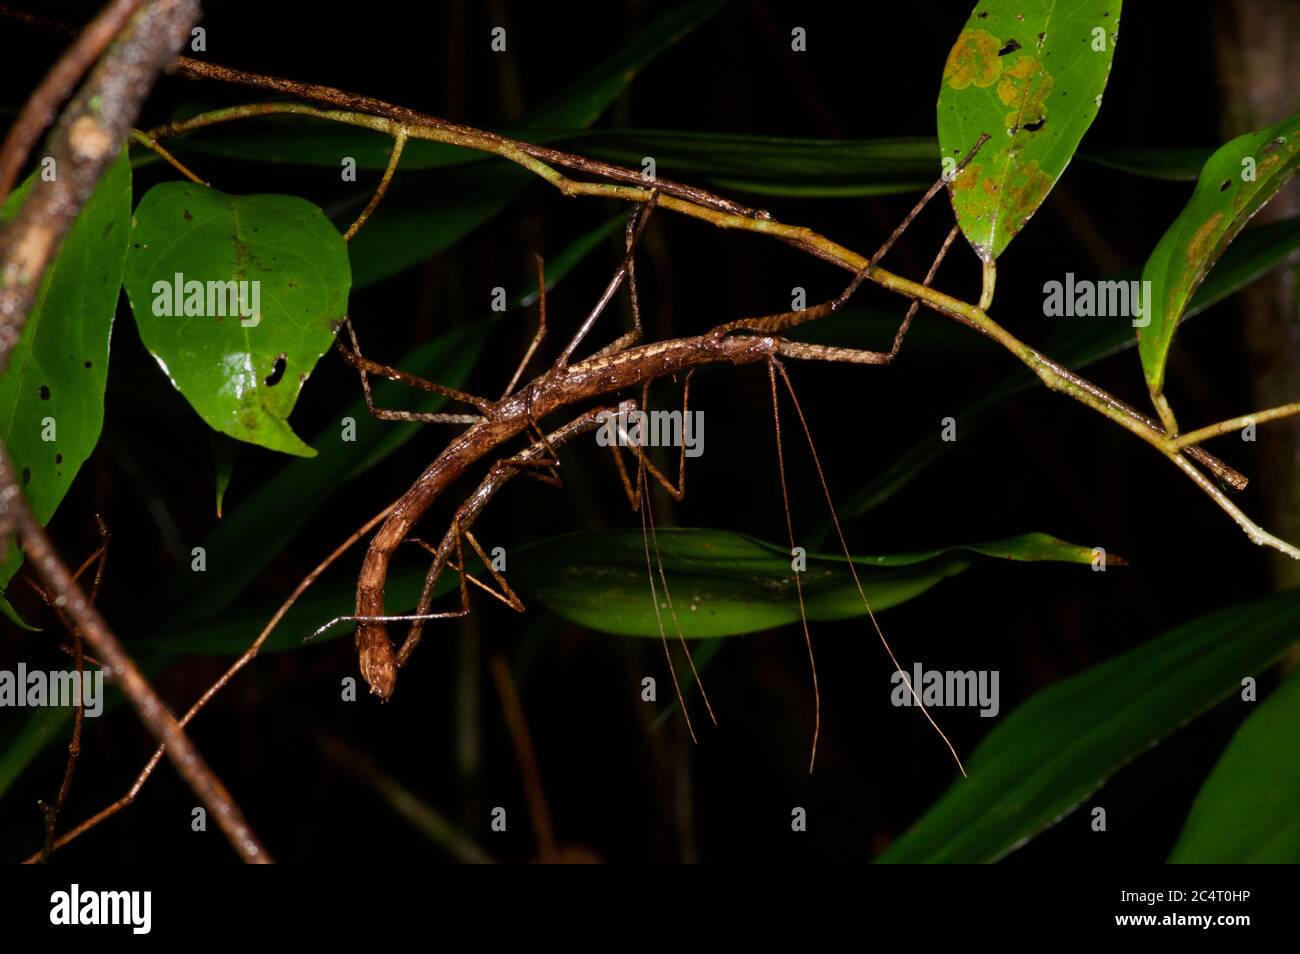 A mating pair of stick insects (phasmids) in the forest at night in Kalutara, Sri Lanka Stock Photo